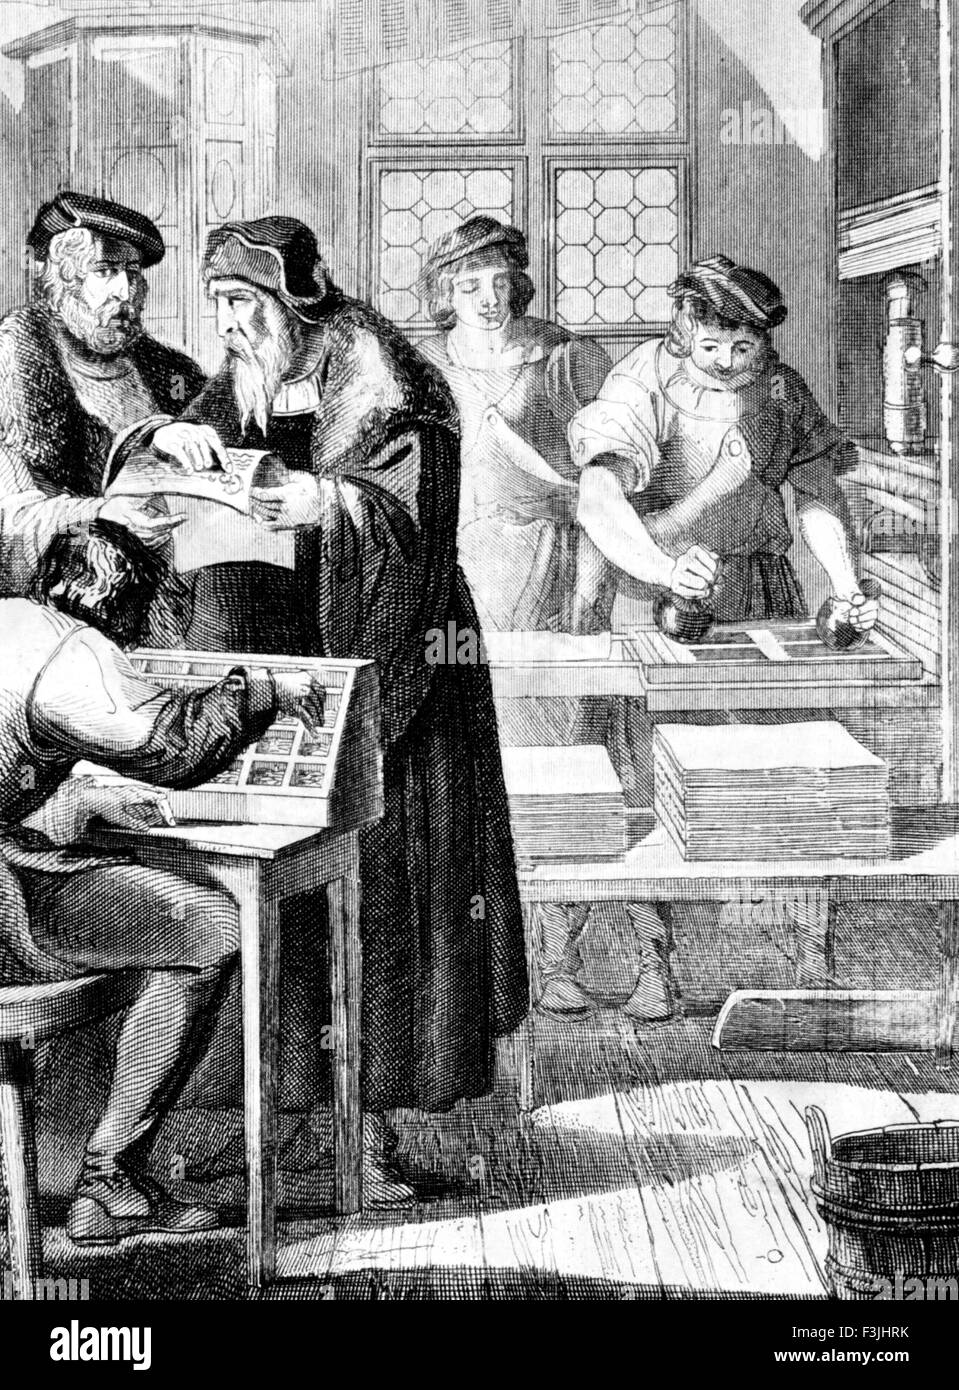 JOHANNES GUTENBERG (c 1398-1468) German inventor of movable type shown with his printing press in a 19th century engarving Stock Photo